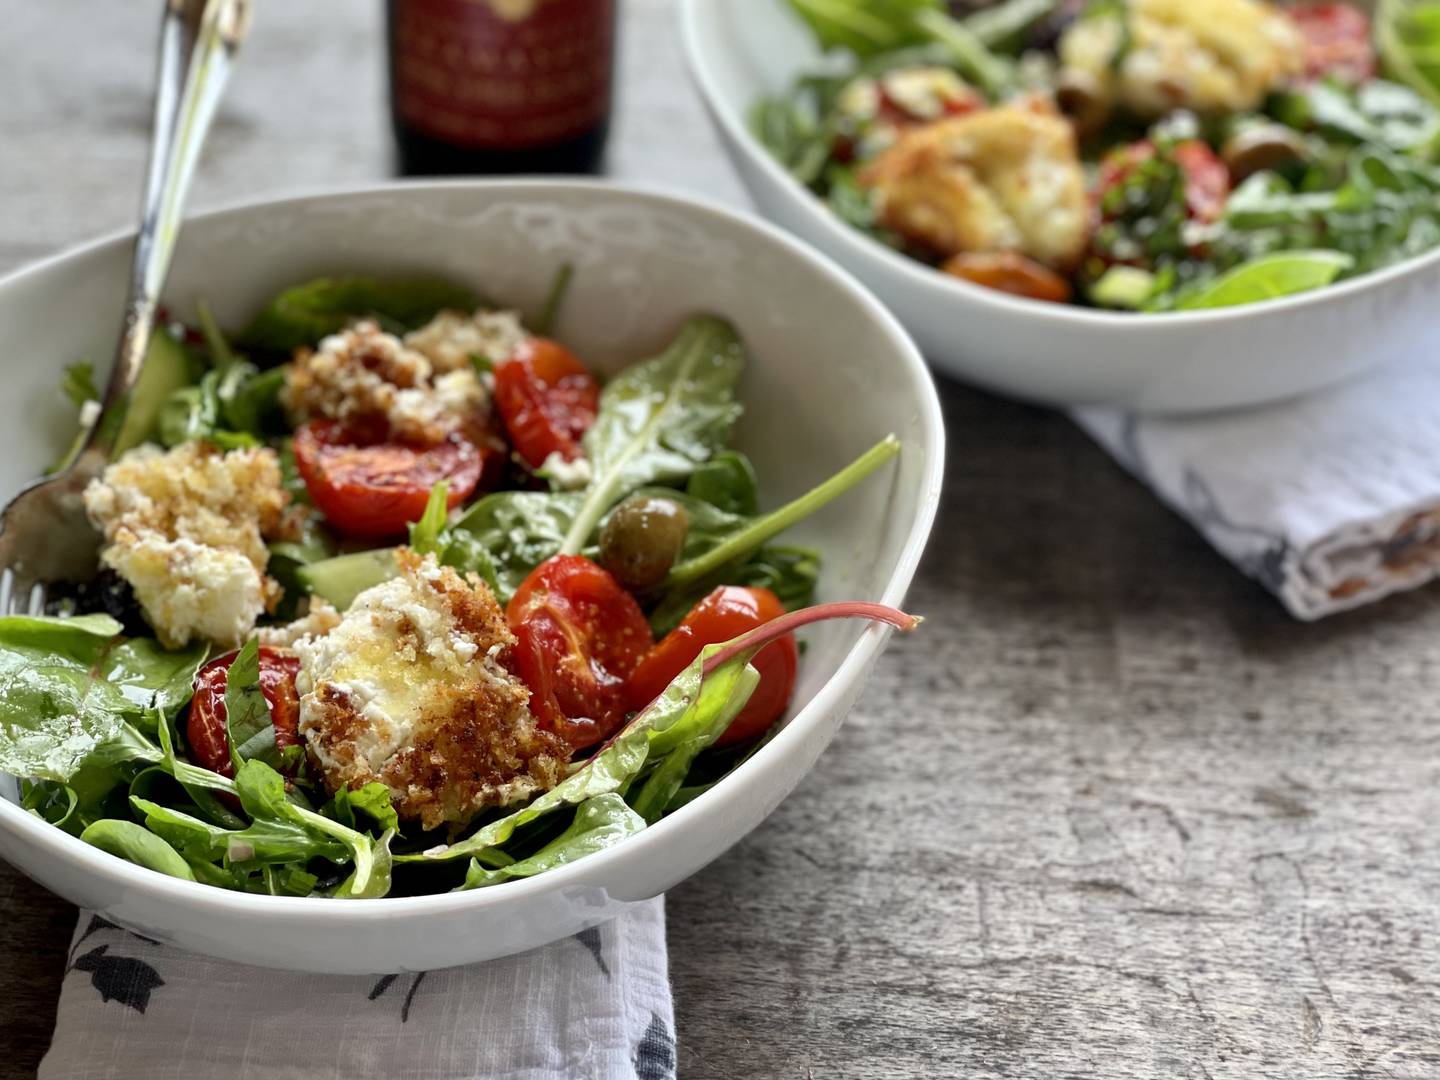 Crispy goat cheese salad with honey roasted tomato and olive